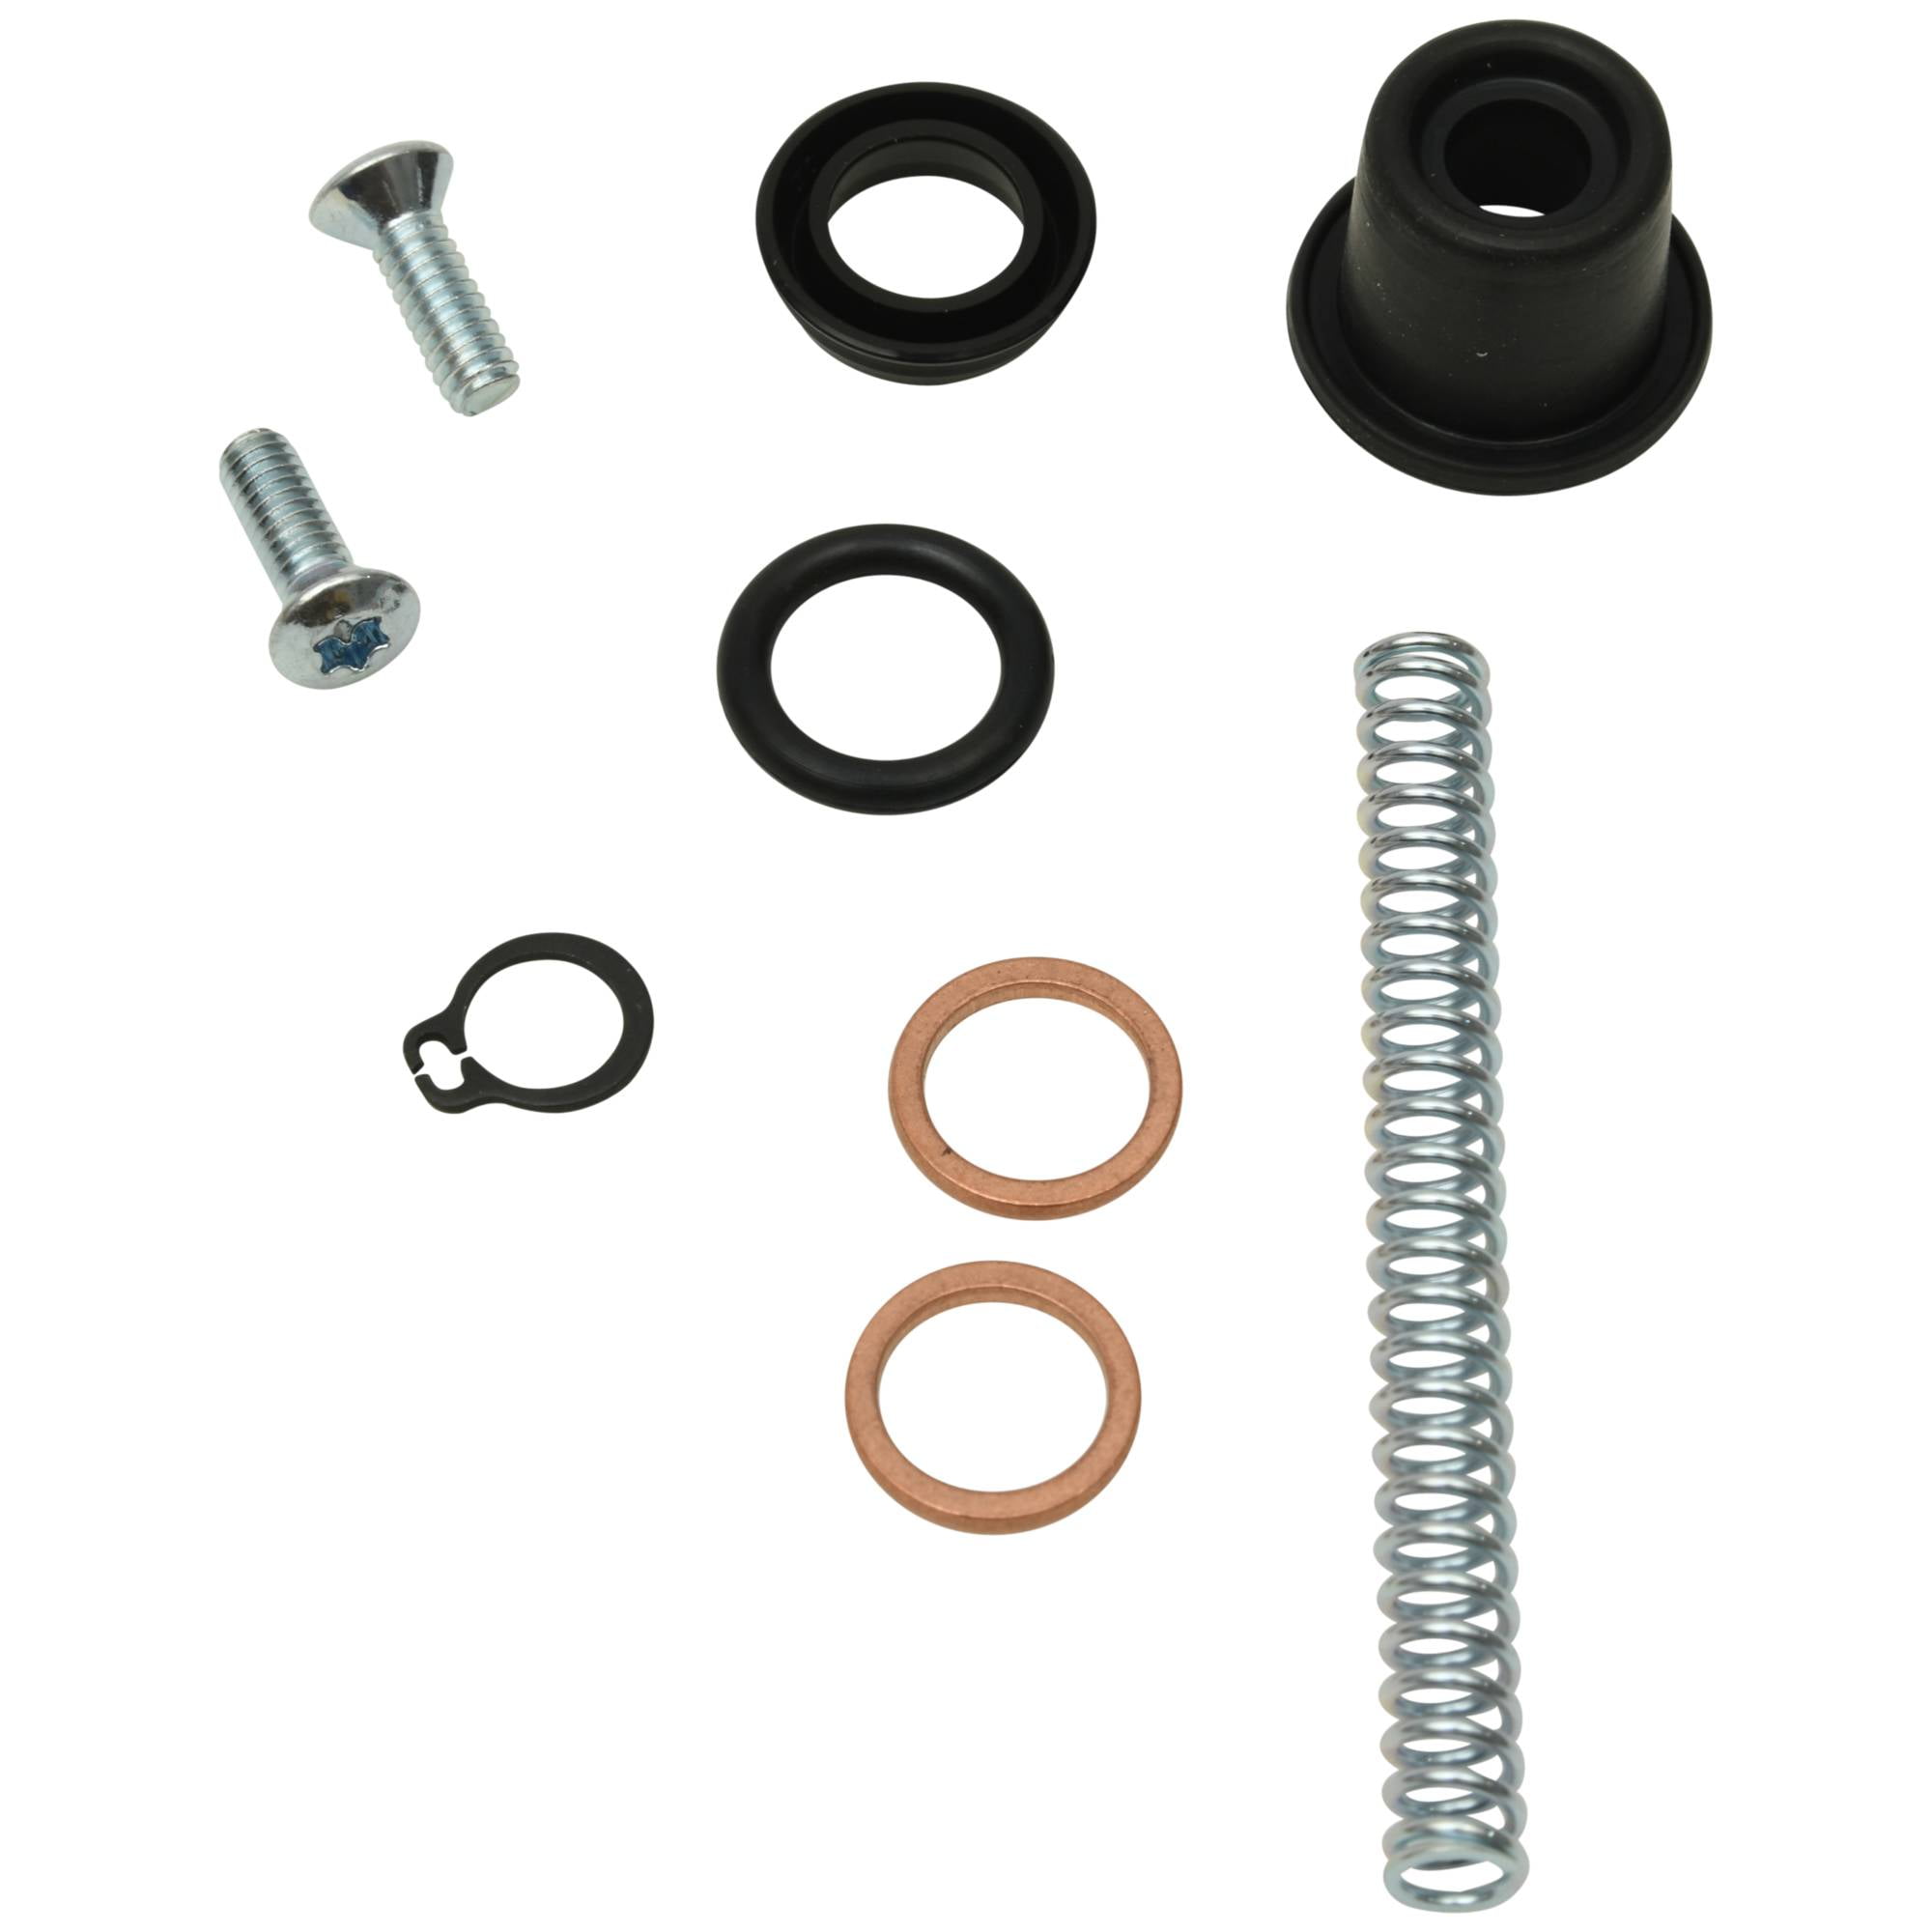 All Balls Racing Master Cylinder Rebuild kit (18-1107) Compatible With/Replacement For Arctic Cat 1000 H2 LTD, 350 Utility 4x4, 366 SE FIS w/AT, 700 H1 EFI MUDPRO, 700 TBX LTD 2011, 1000 H2 MUDPRO